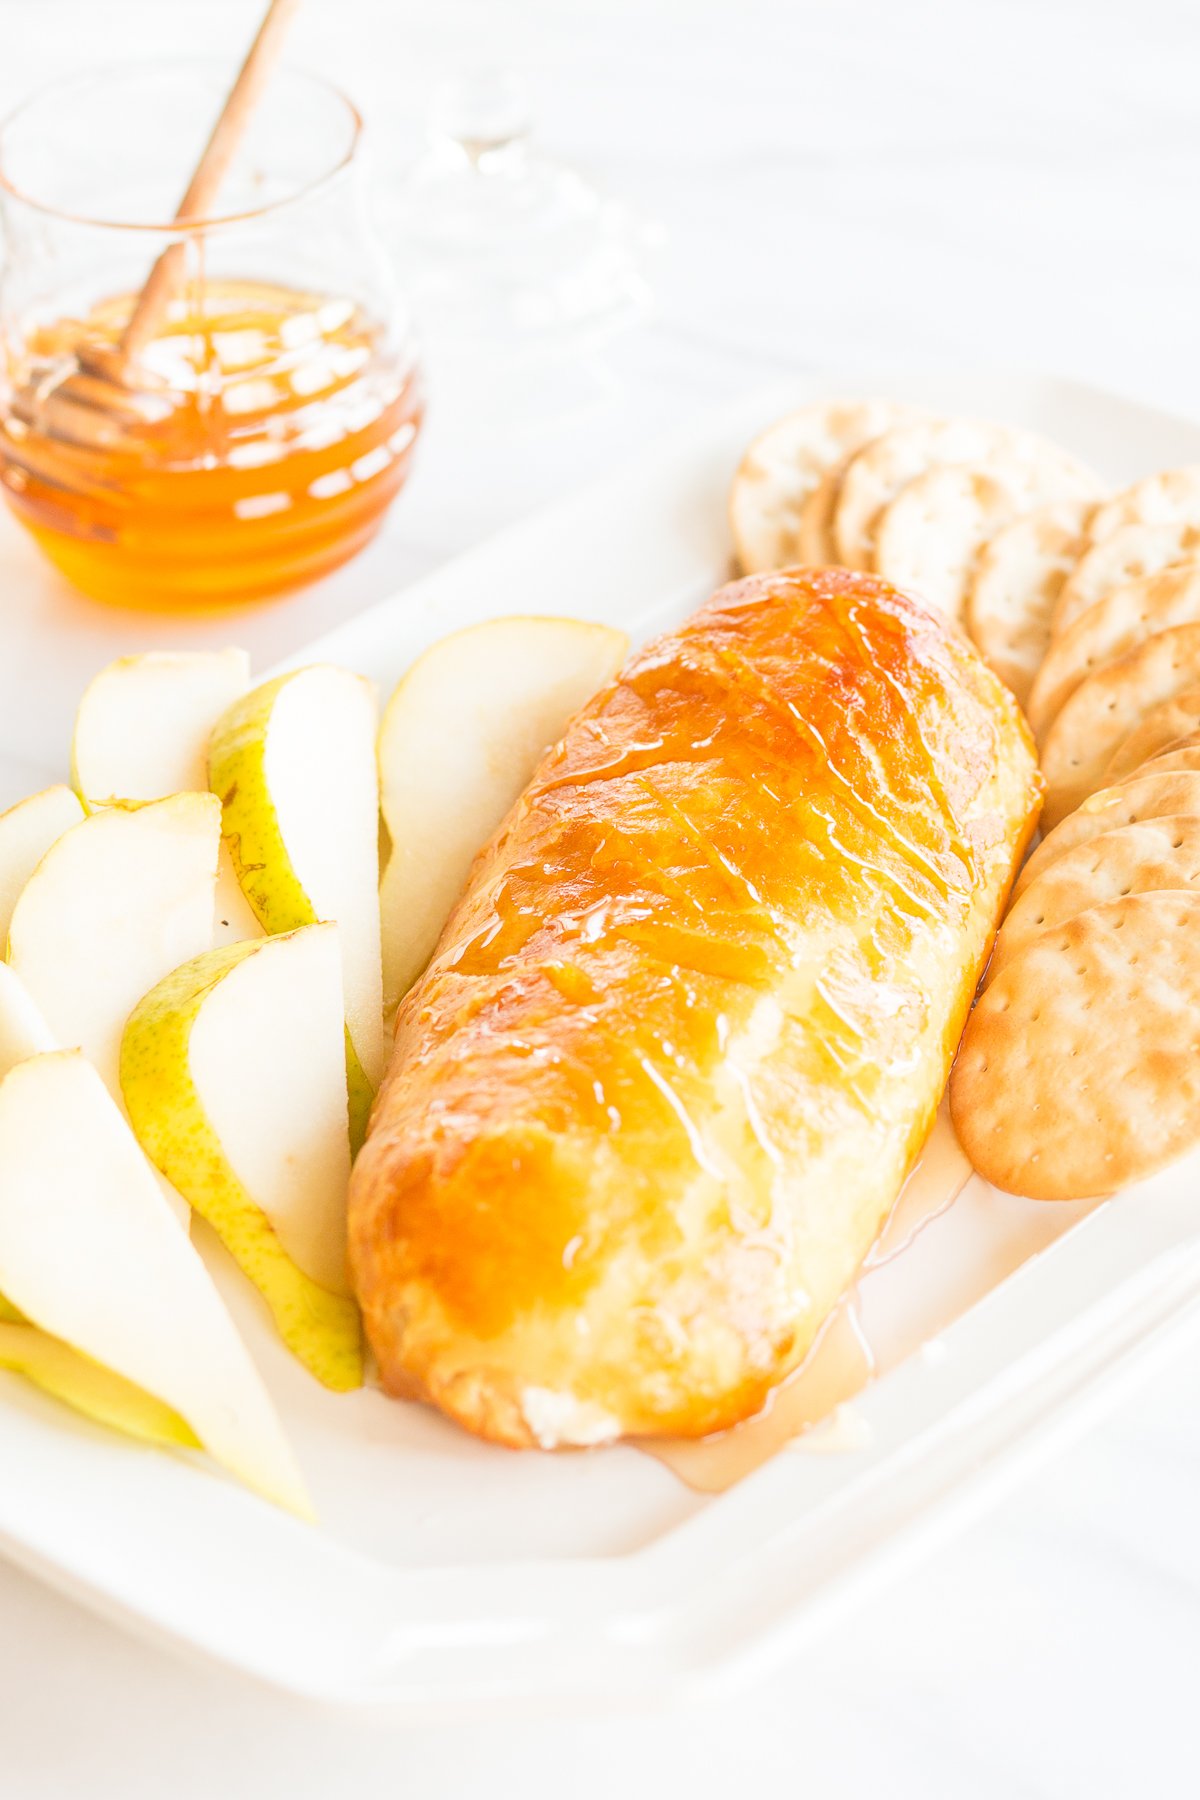 Baked goat cheese topped with honey with sliced pears and crackers for serving.